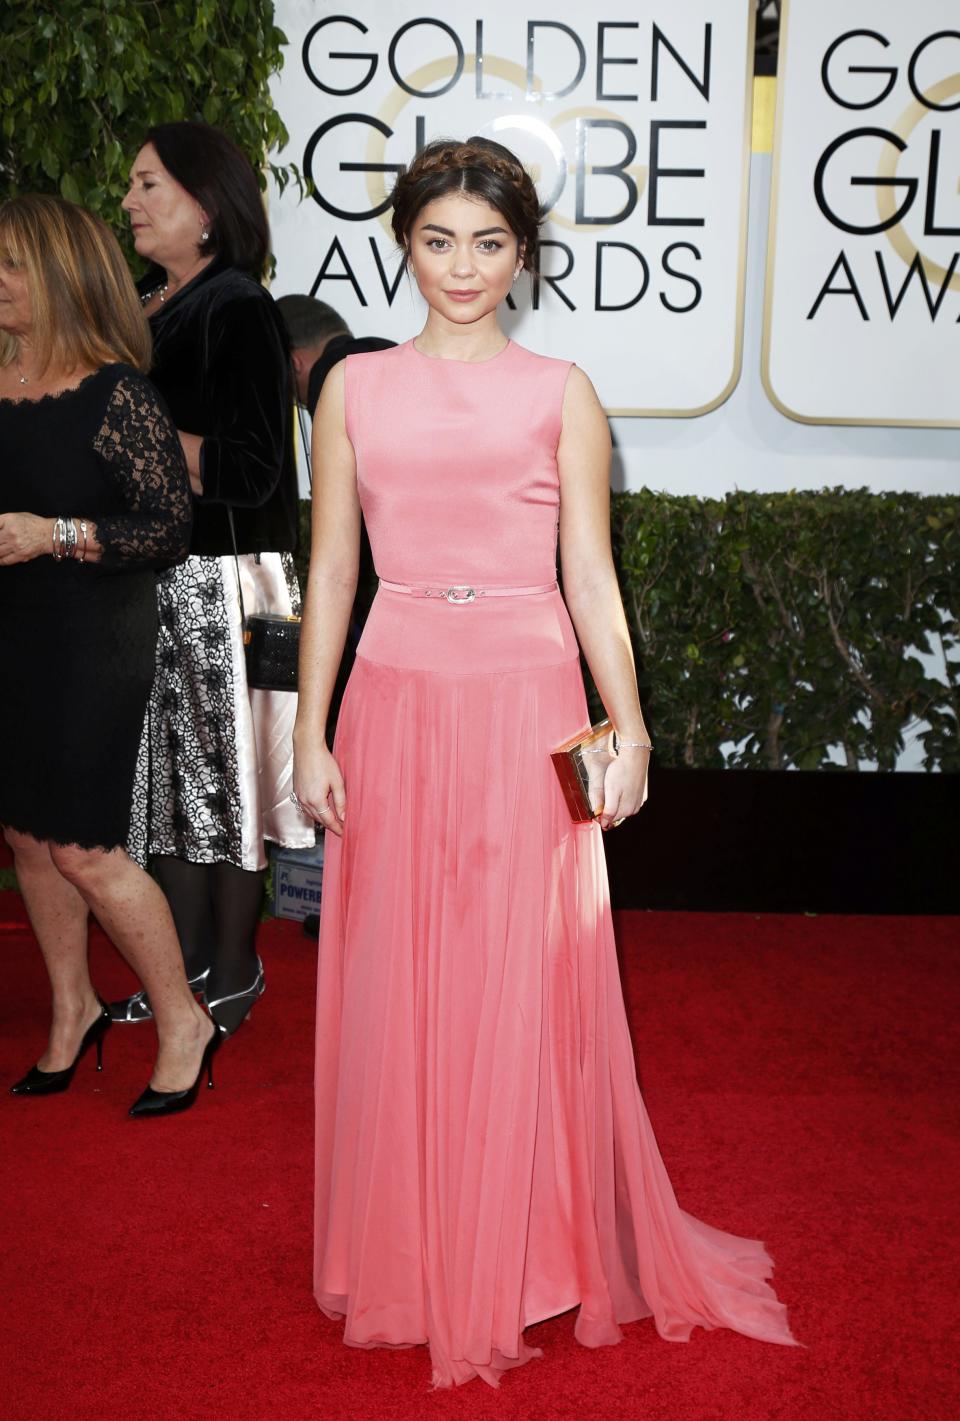 Actress Sarah Hyland arrives at the 71st annual Golden Globe Awards in Beverly Hills, California January 12, 2014. REUTERS/Danny Moloshok (UNITED STATES - Tags: Entertainment)(GOLDENGLOBES-ARRIVALS)